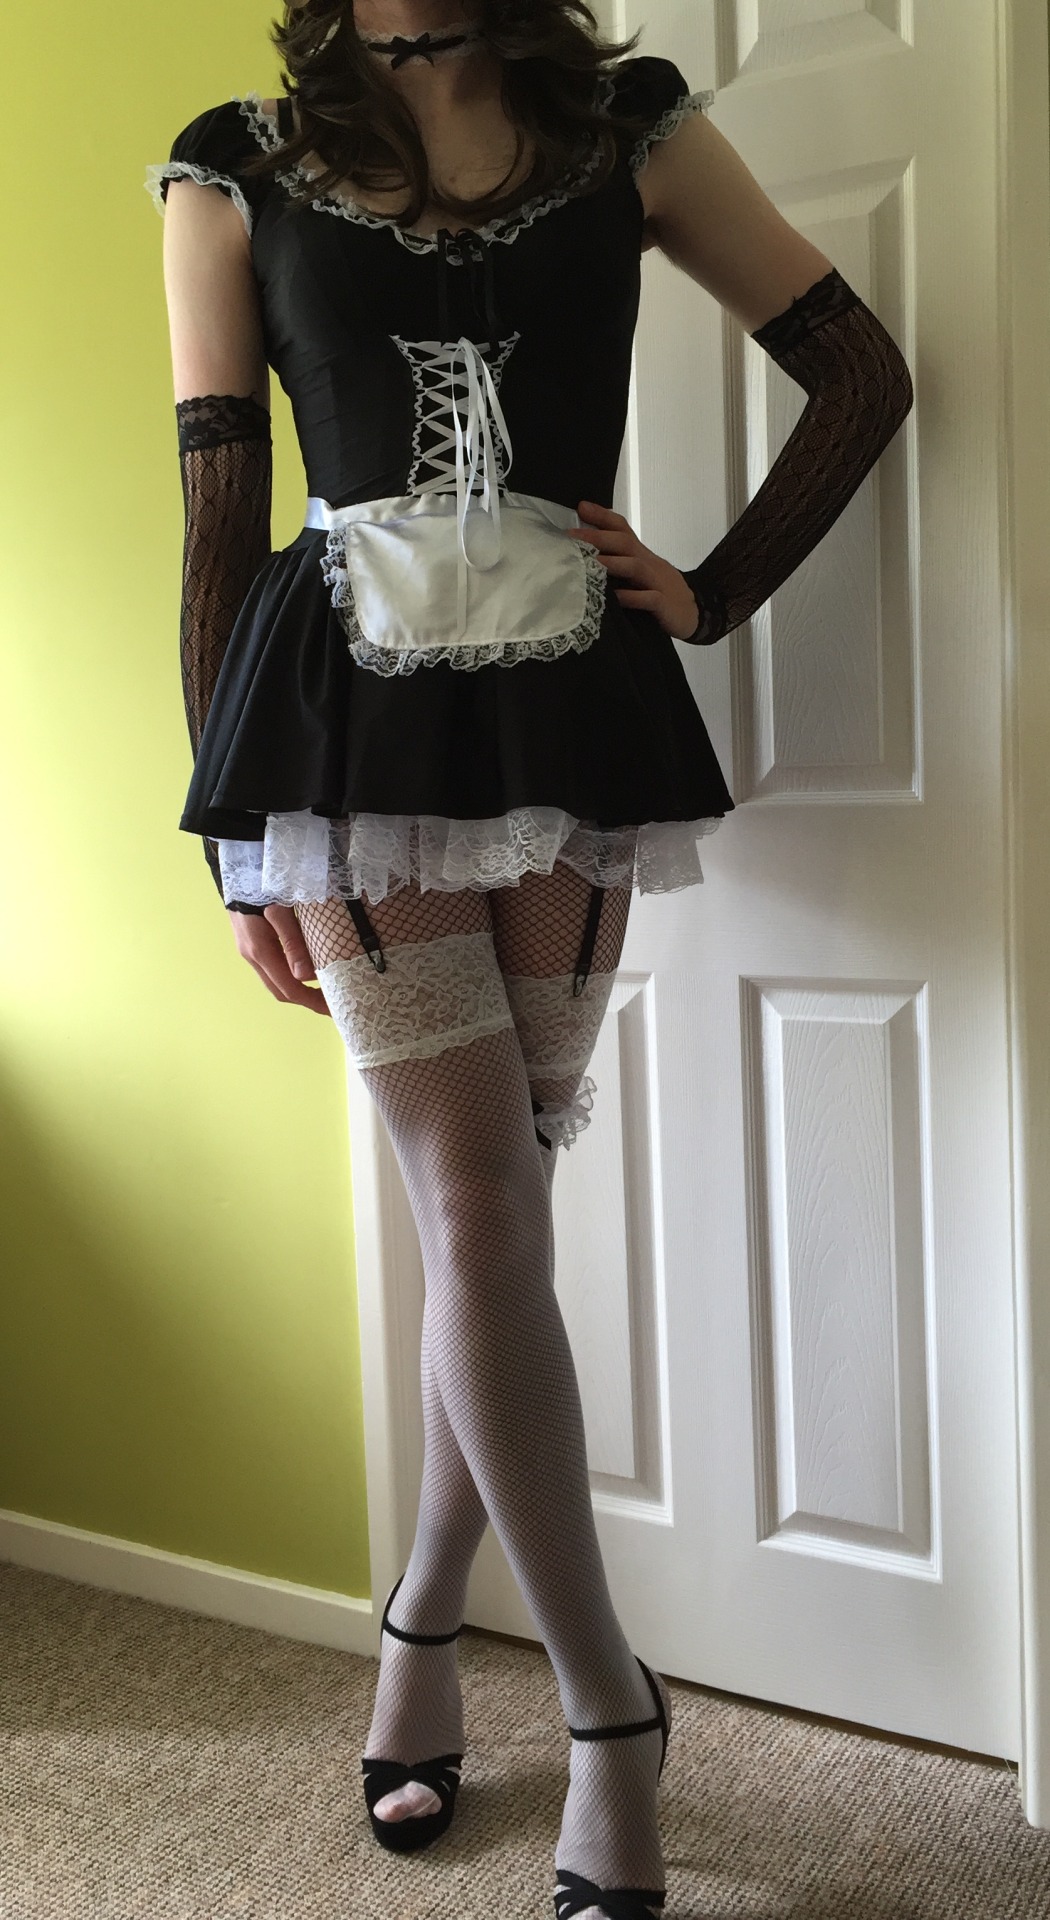 Vanfair99 Sissygurlholly Super Awesome Sissy Maid I Love The White Stockings Of The Nets